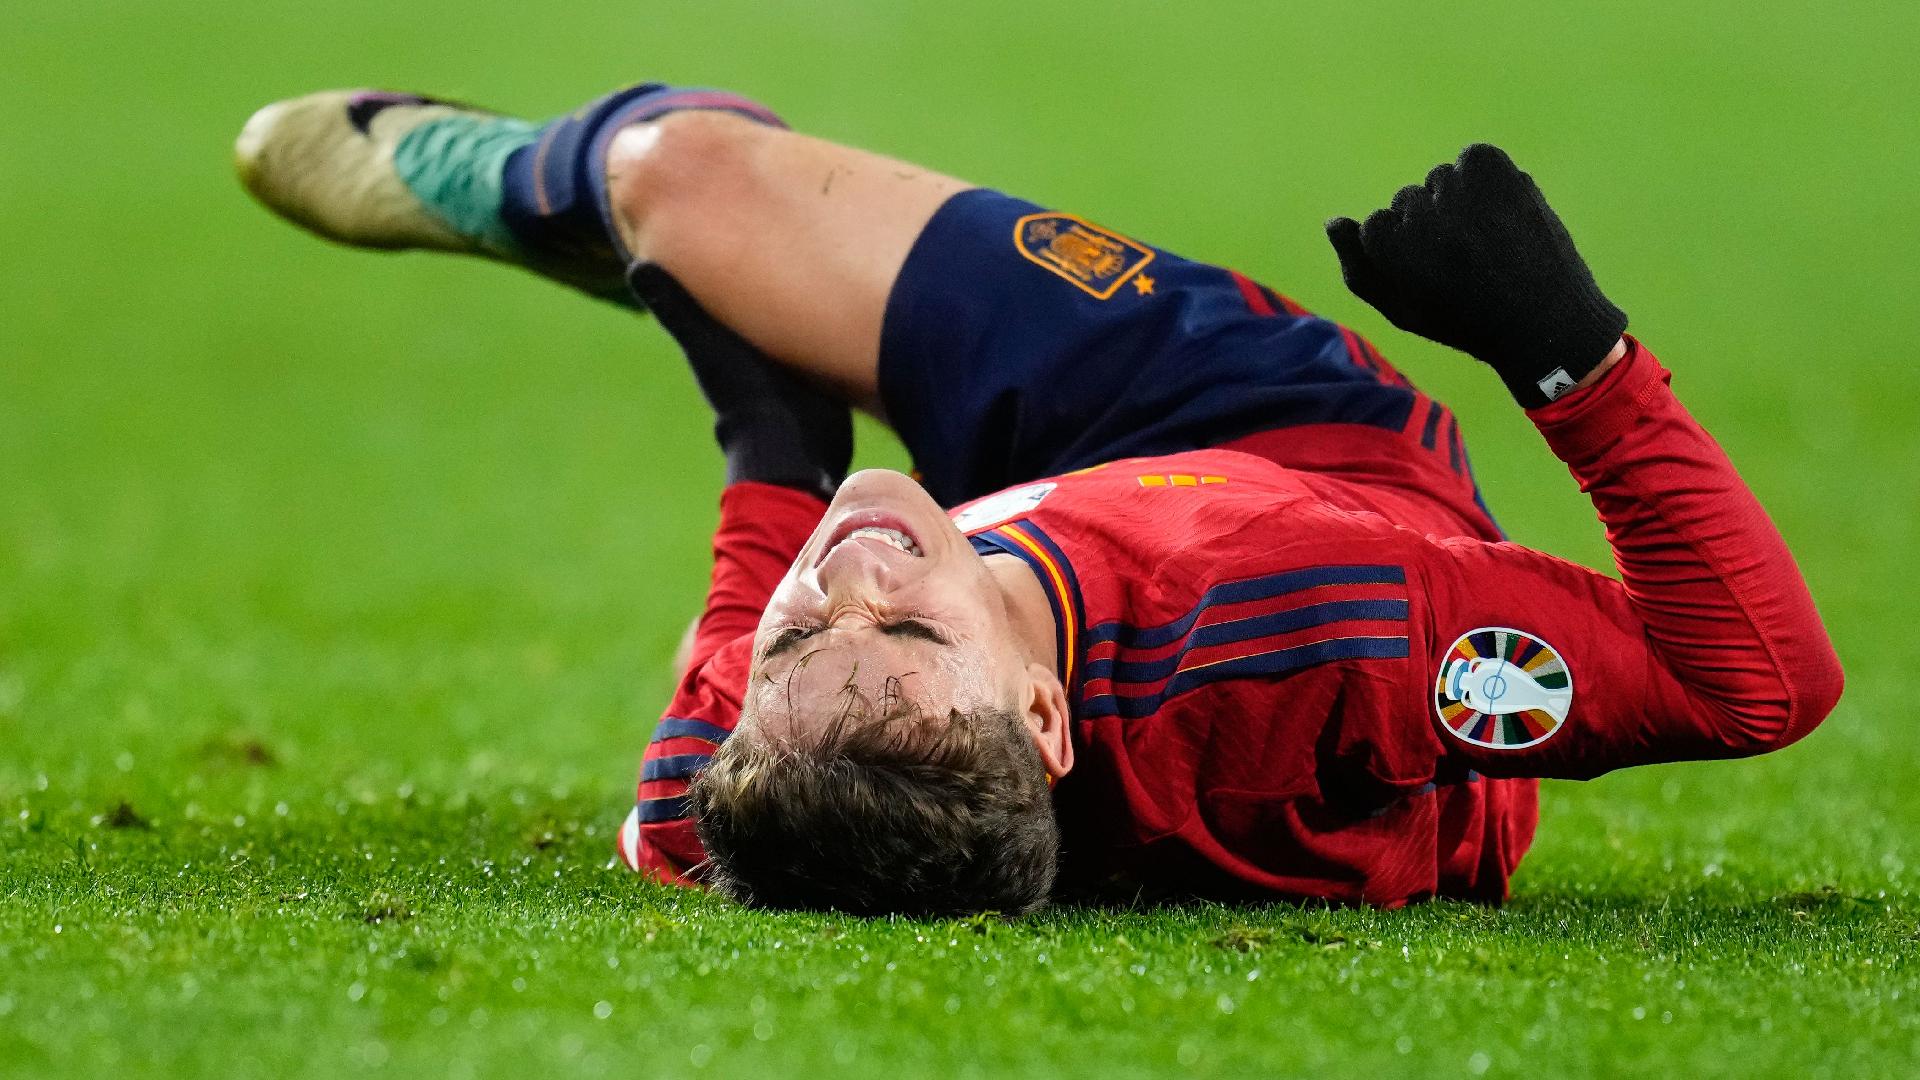 Barcelona and Spain star Gavi to have surgery on torn ACL